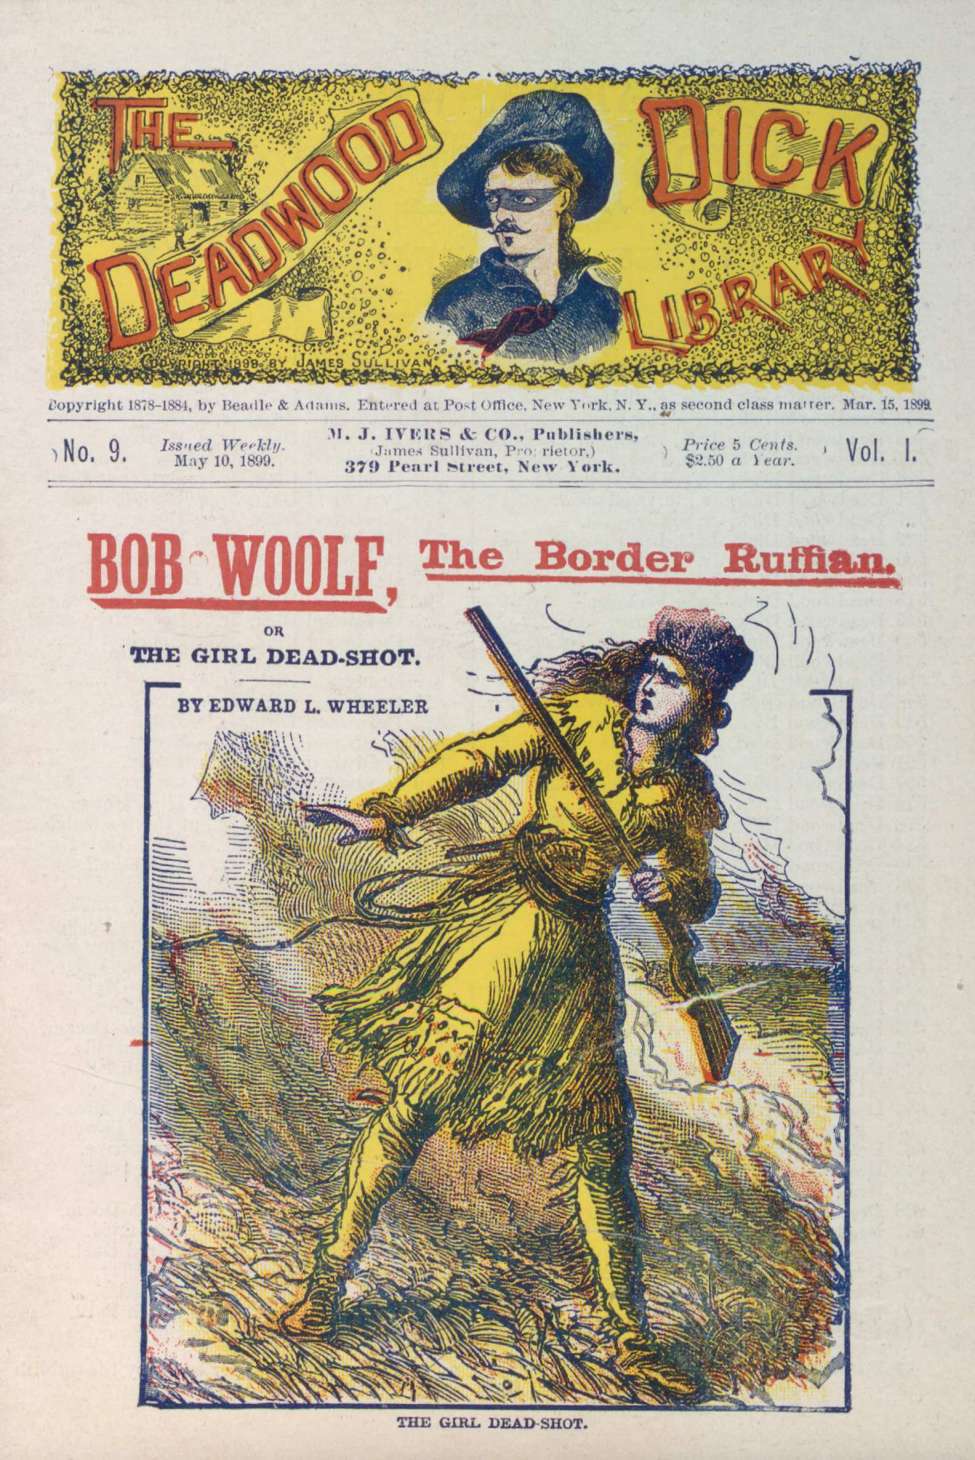 Book Cover For Deadwood Dick Library v1 9 - Bob Woolf, the Border Ruffian